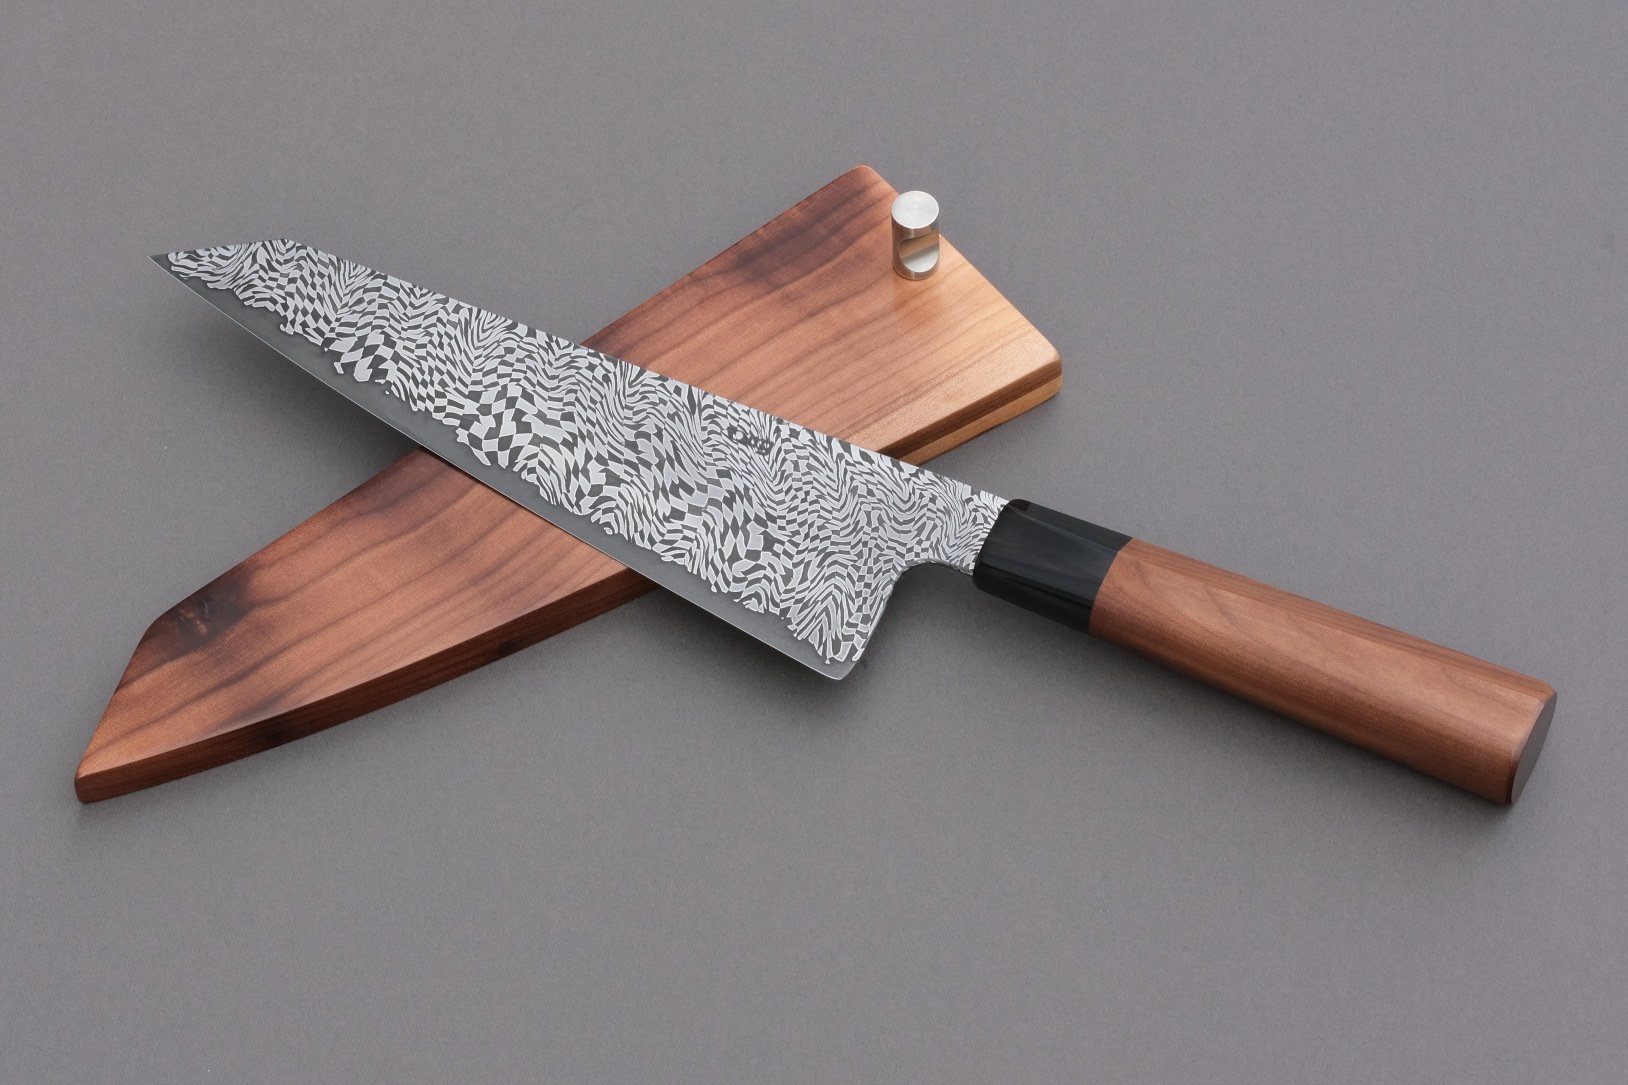 Excalibur knife from Guldimann with a handle and sheath from Bijouwood cherry